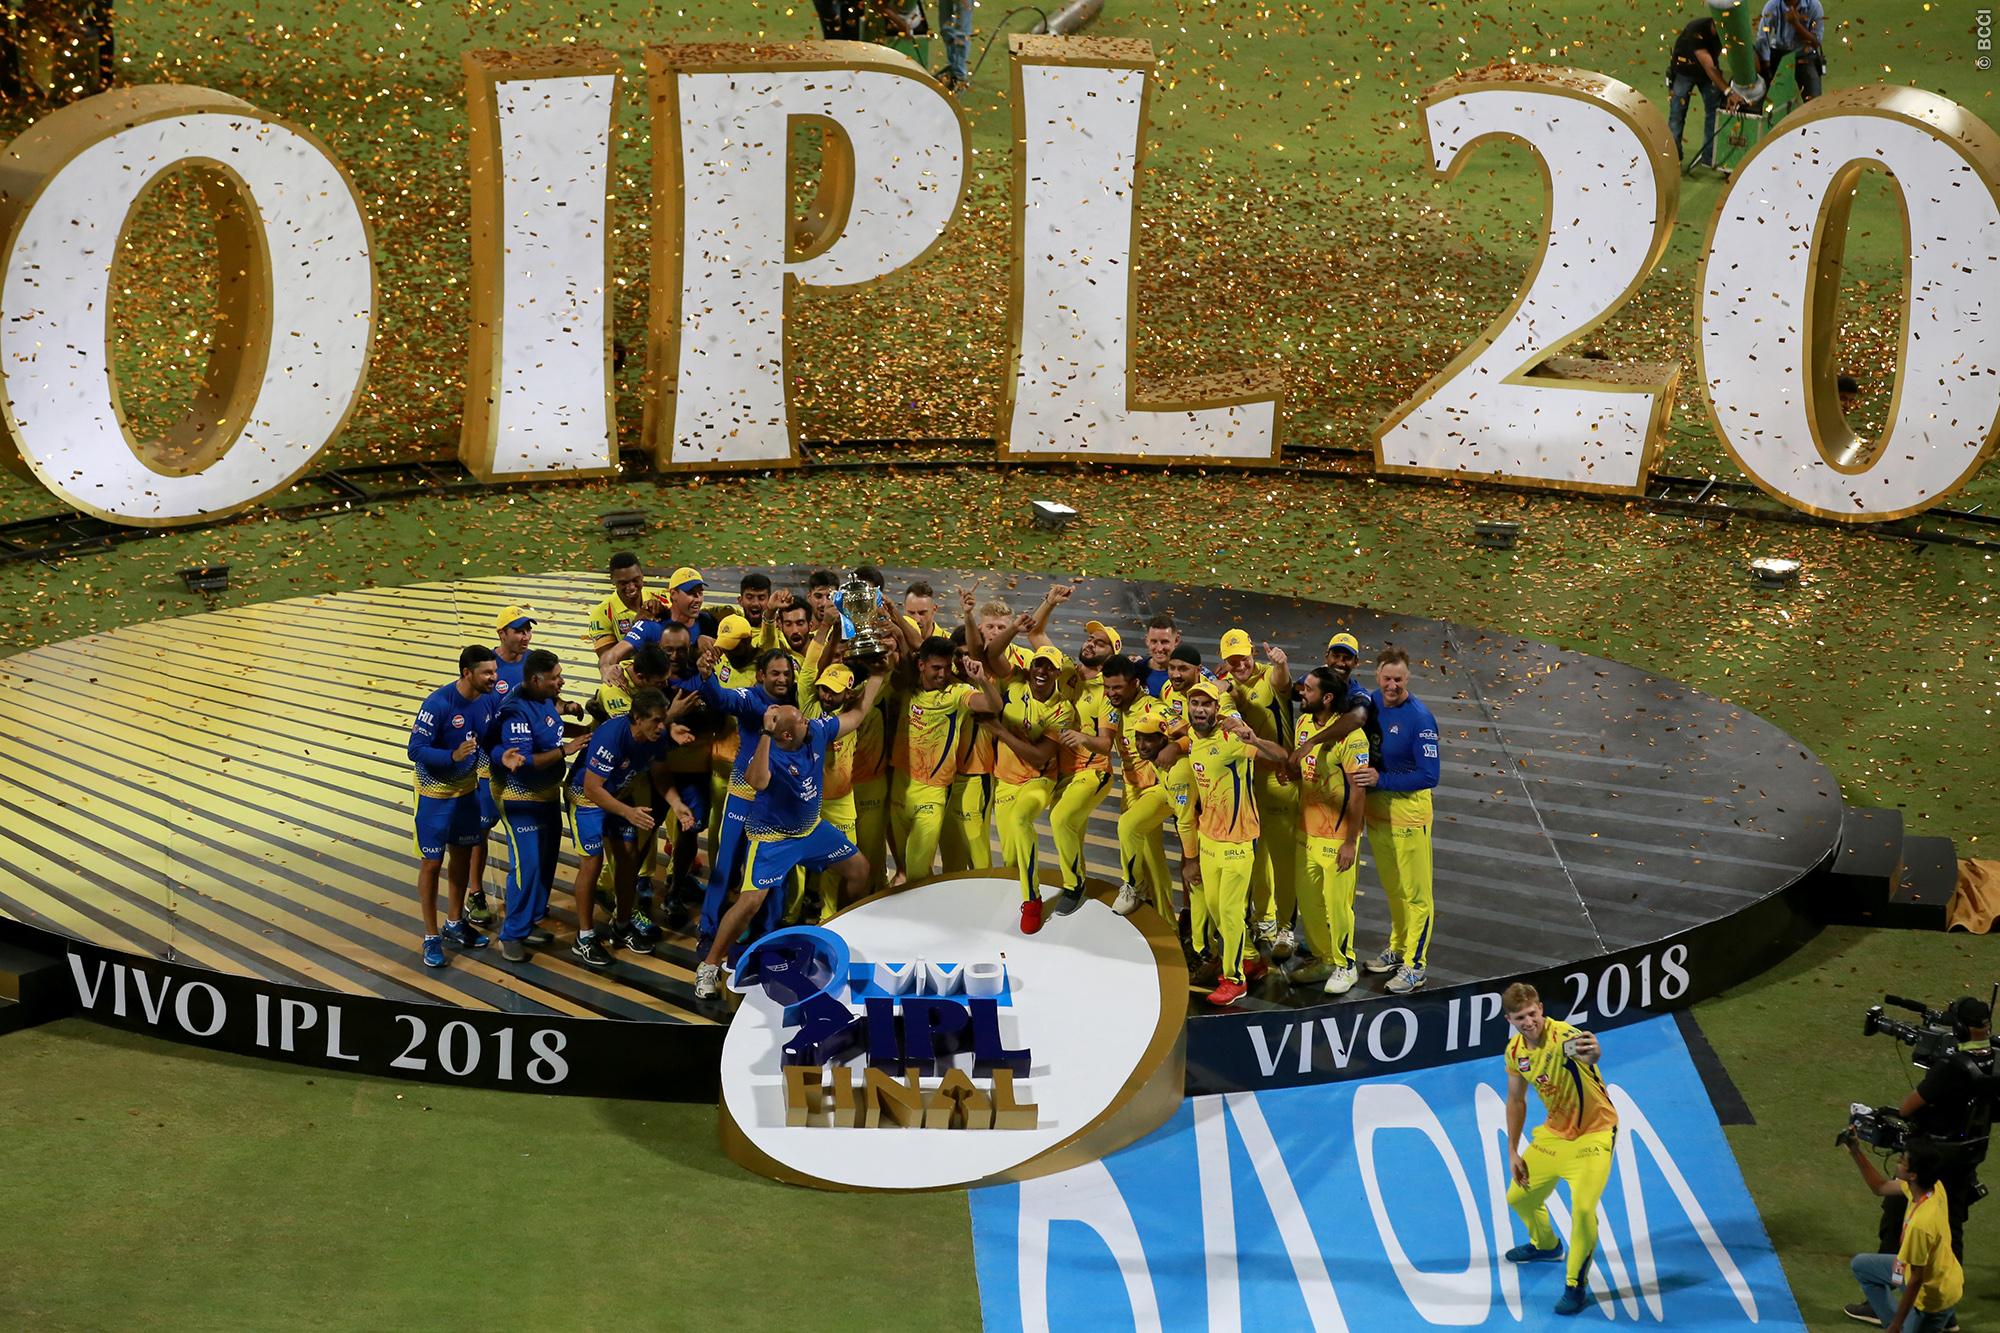 Postponement of T20 World Cup could make way for IPL, feels Mark Taylor